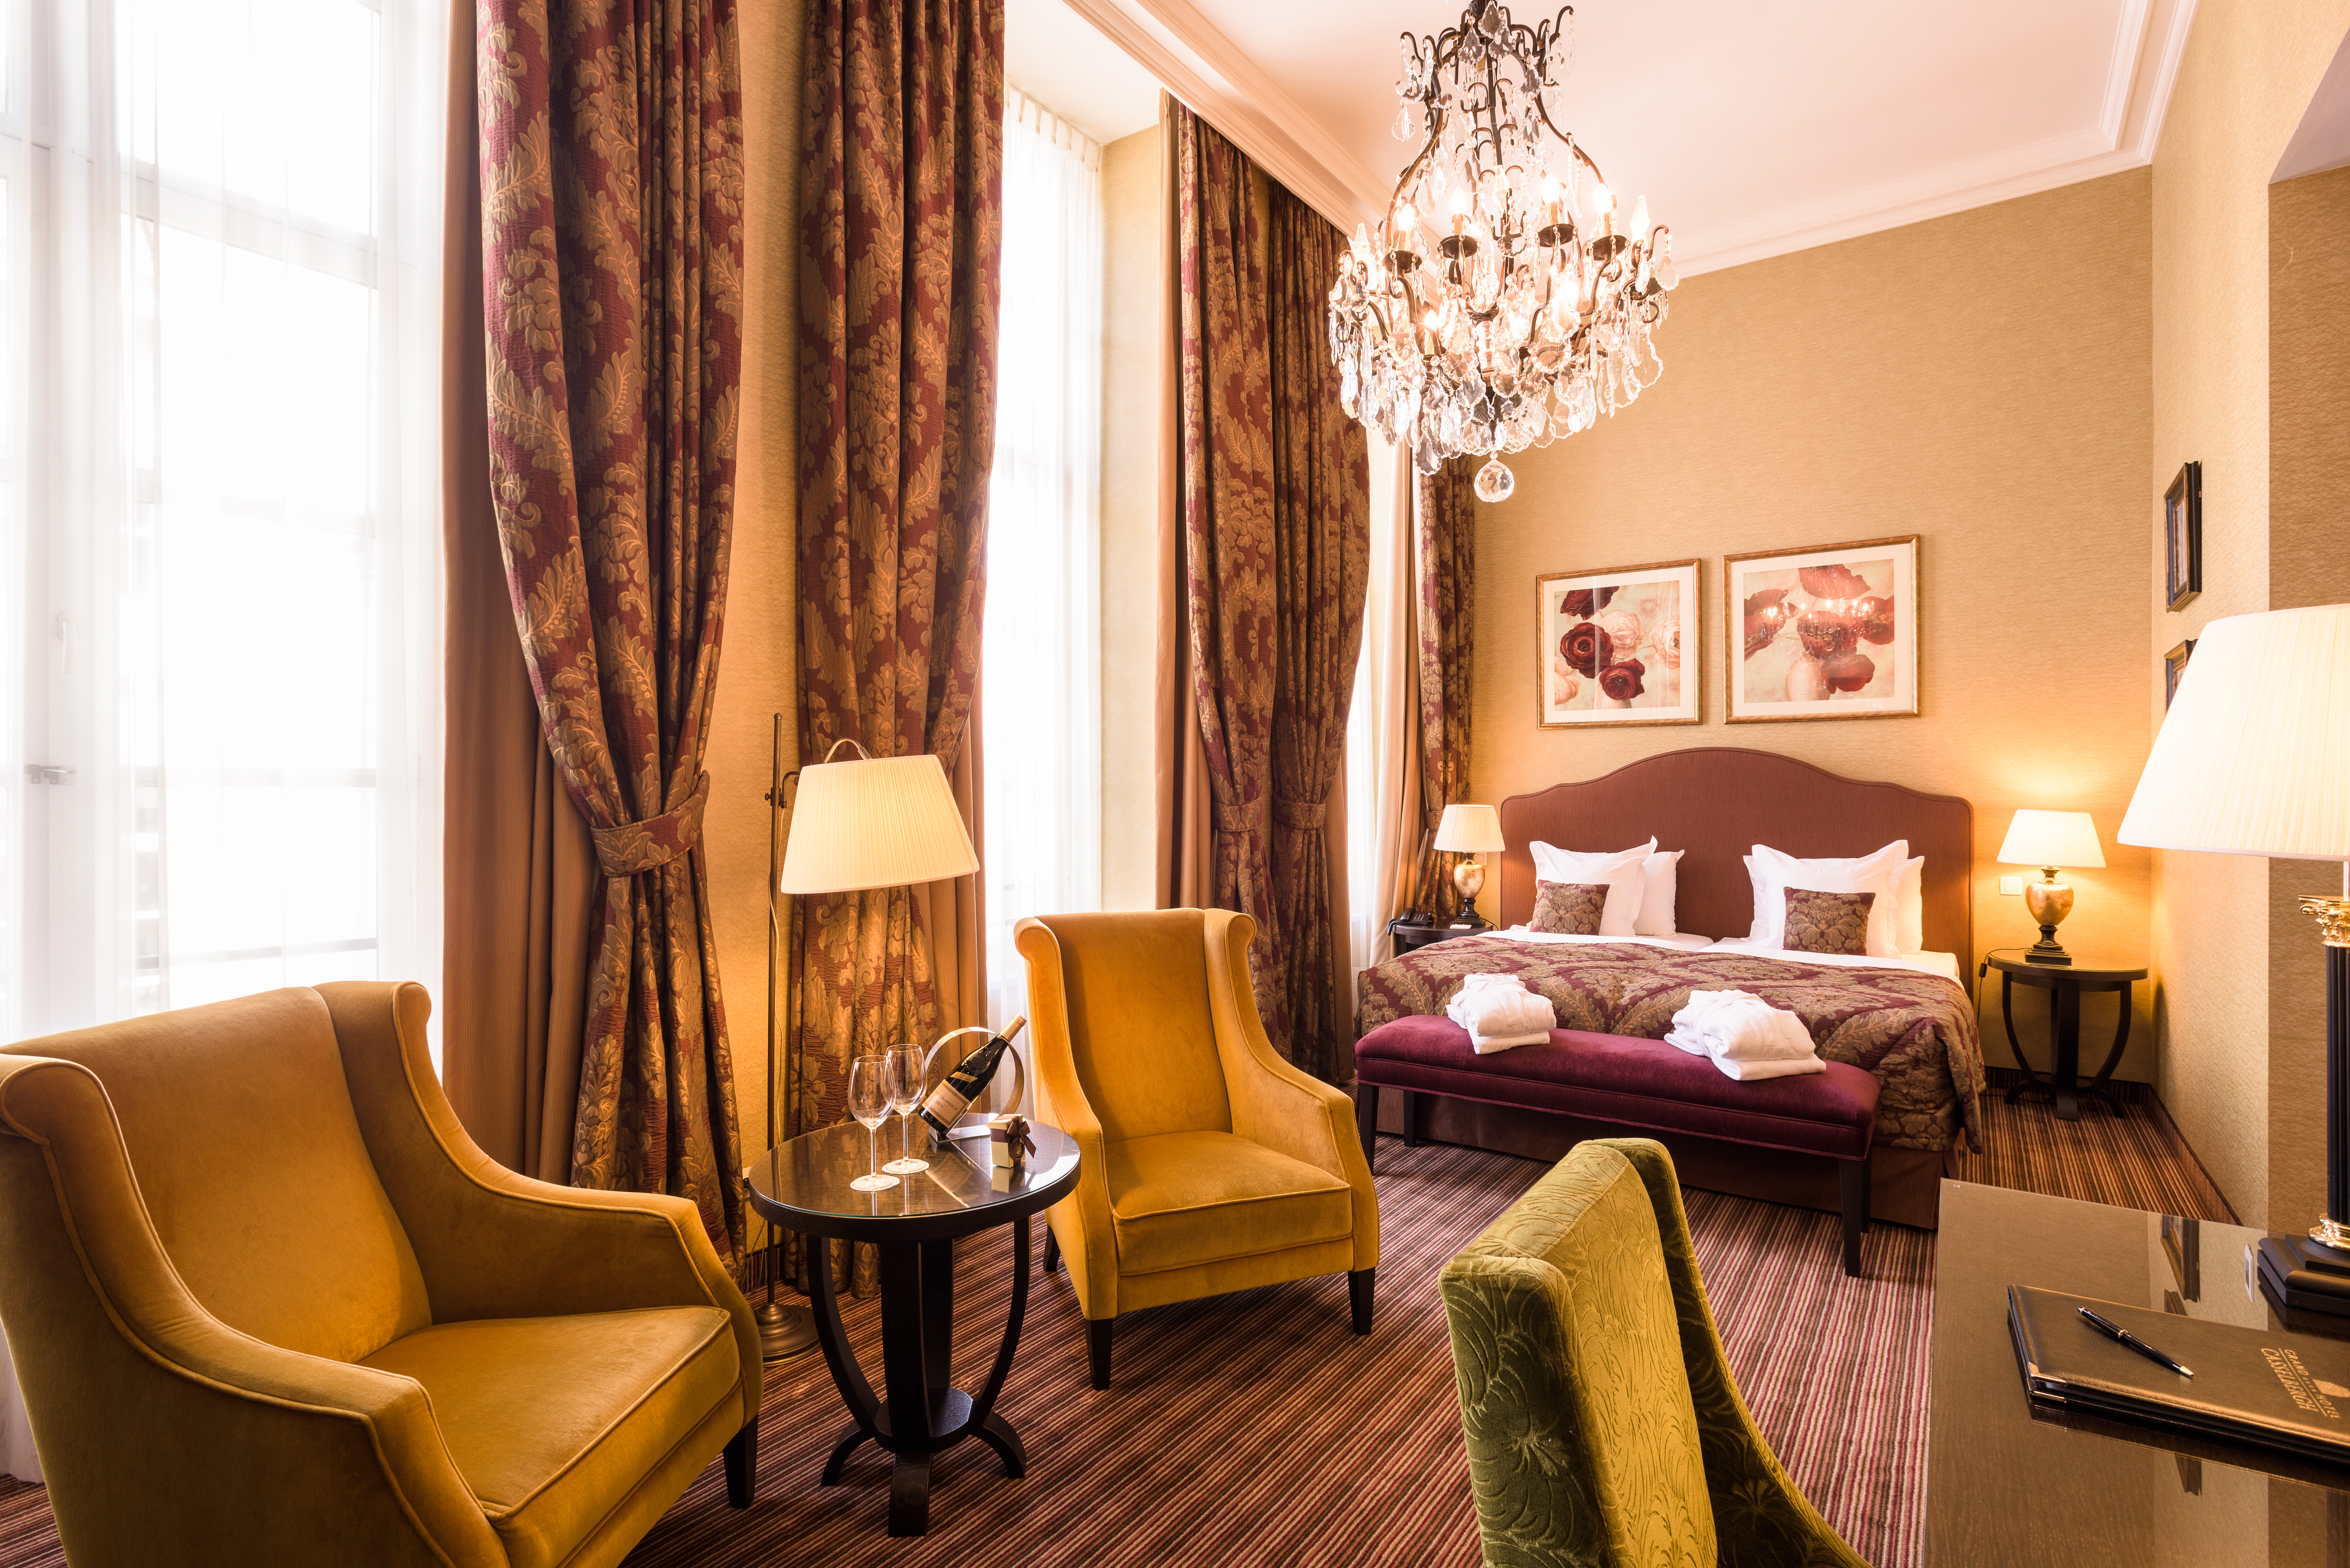 Grand Hotel Casselbergh Brugge <br/>118.00 ew <br/> <a href='http://vakantieoplossing.nl/outpage/?id=417a525ea26a63717083f23c59d09180' target='_blank'>View Details</a>